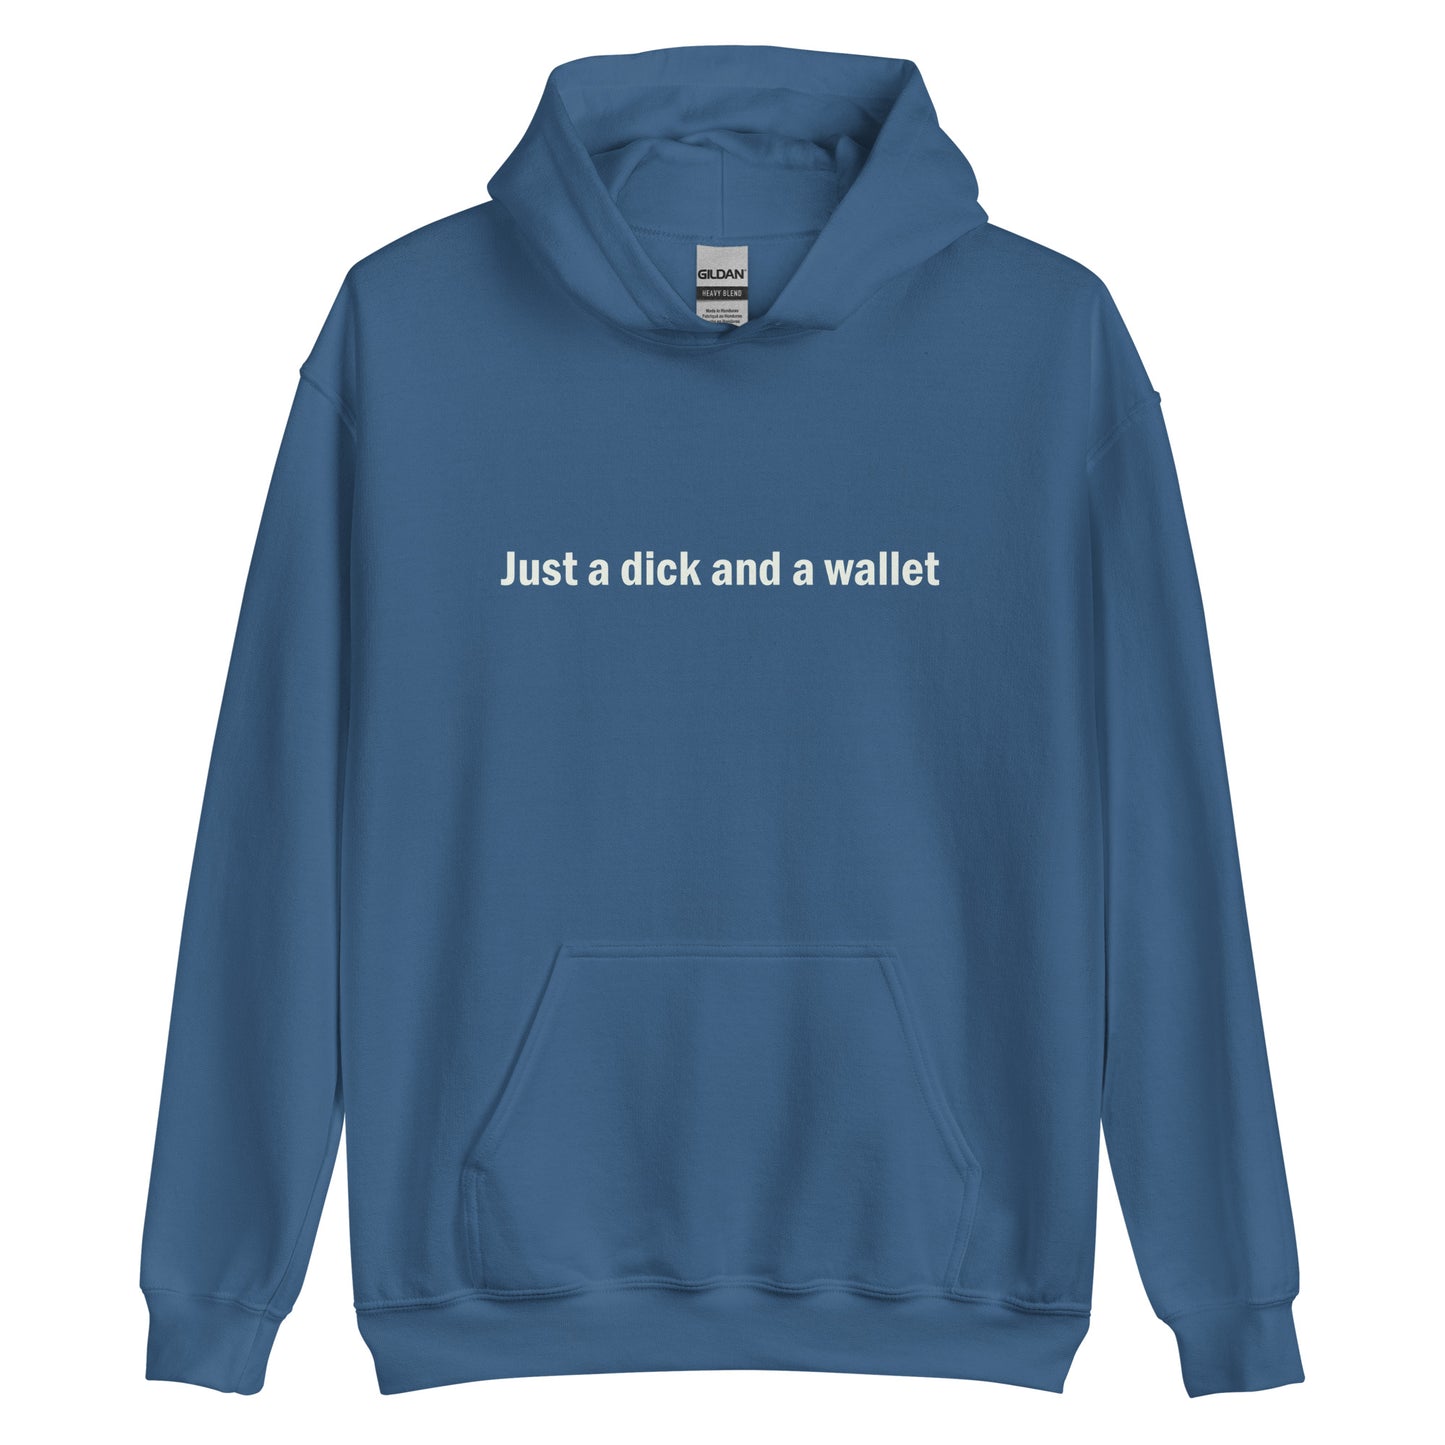 Just a dick and a wallet hoodie